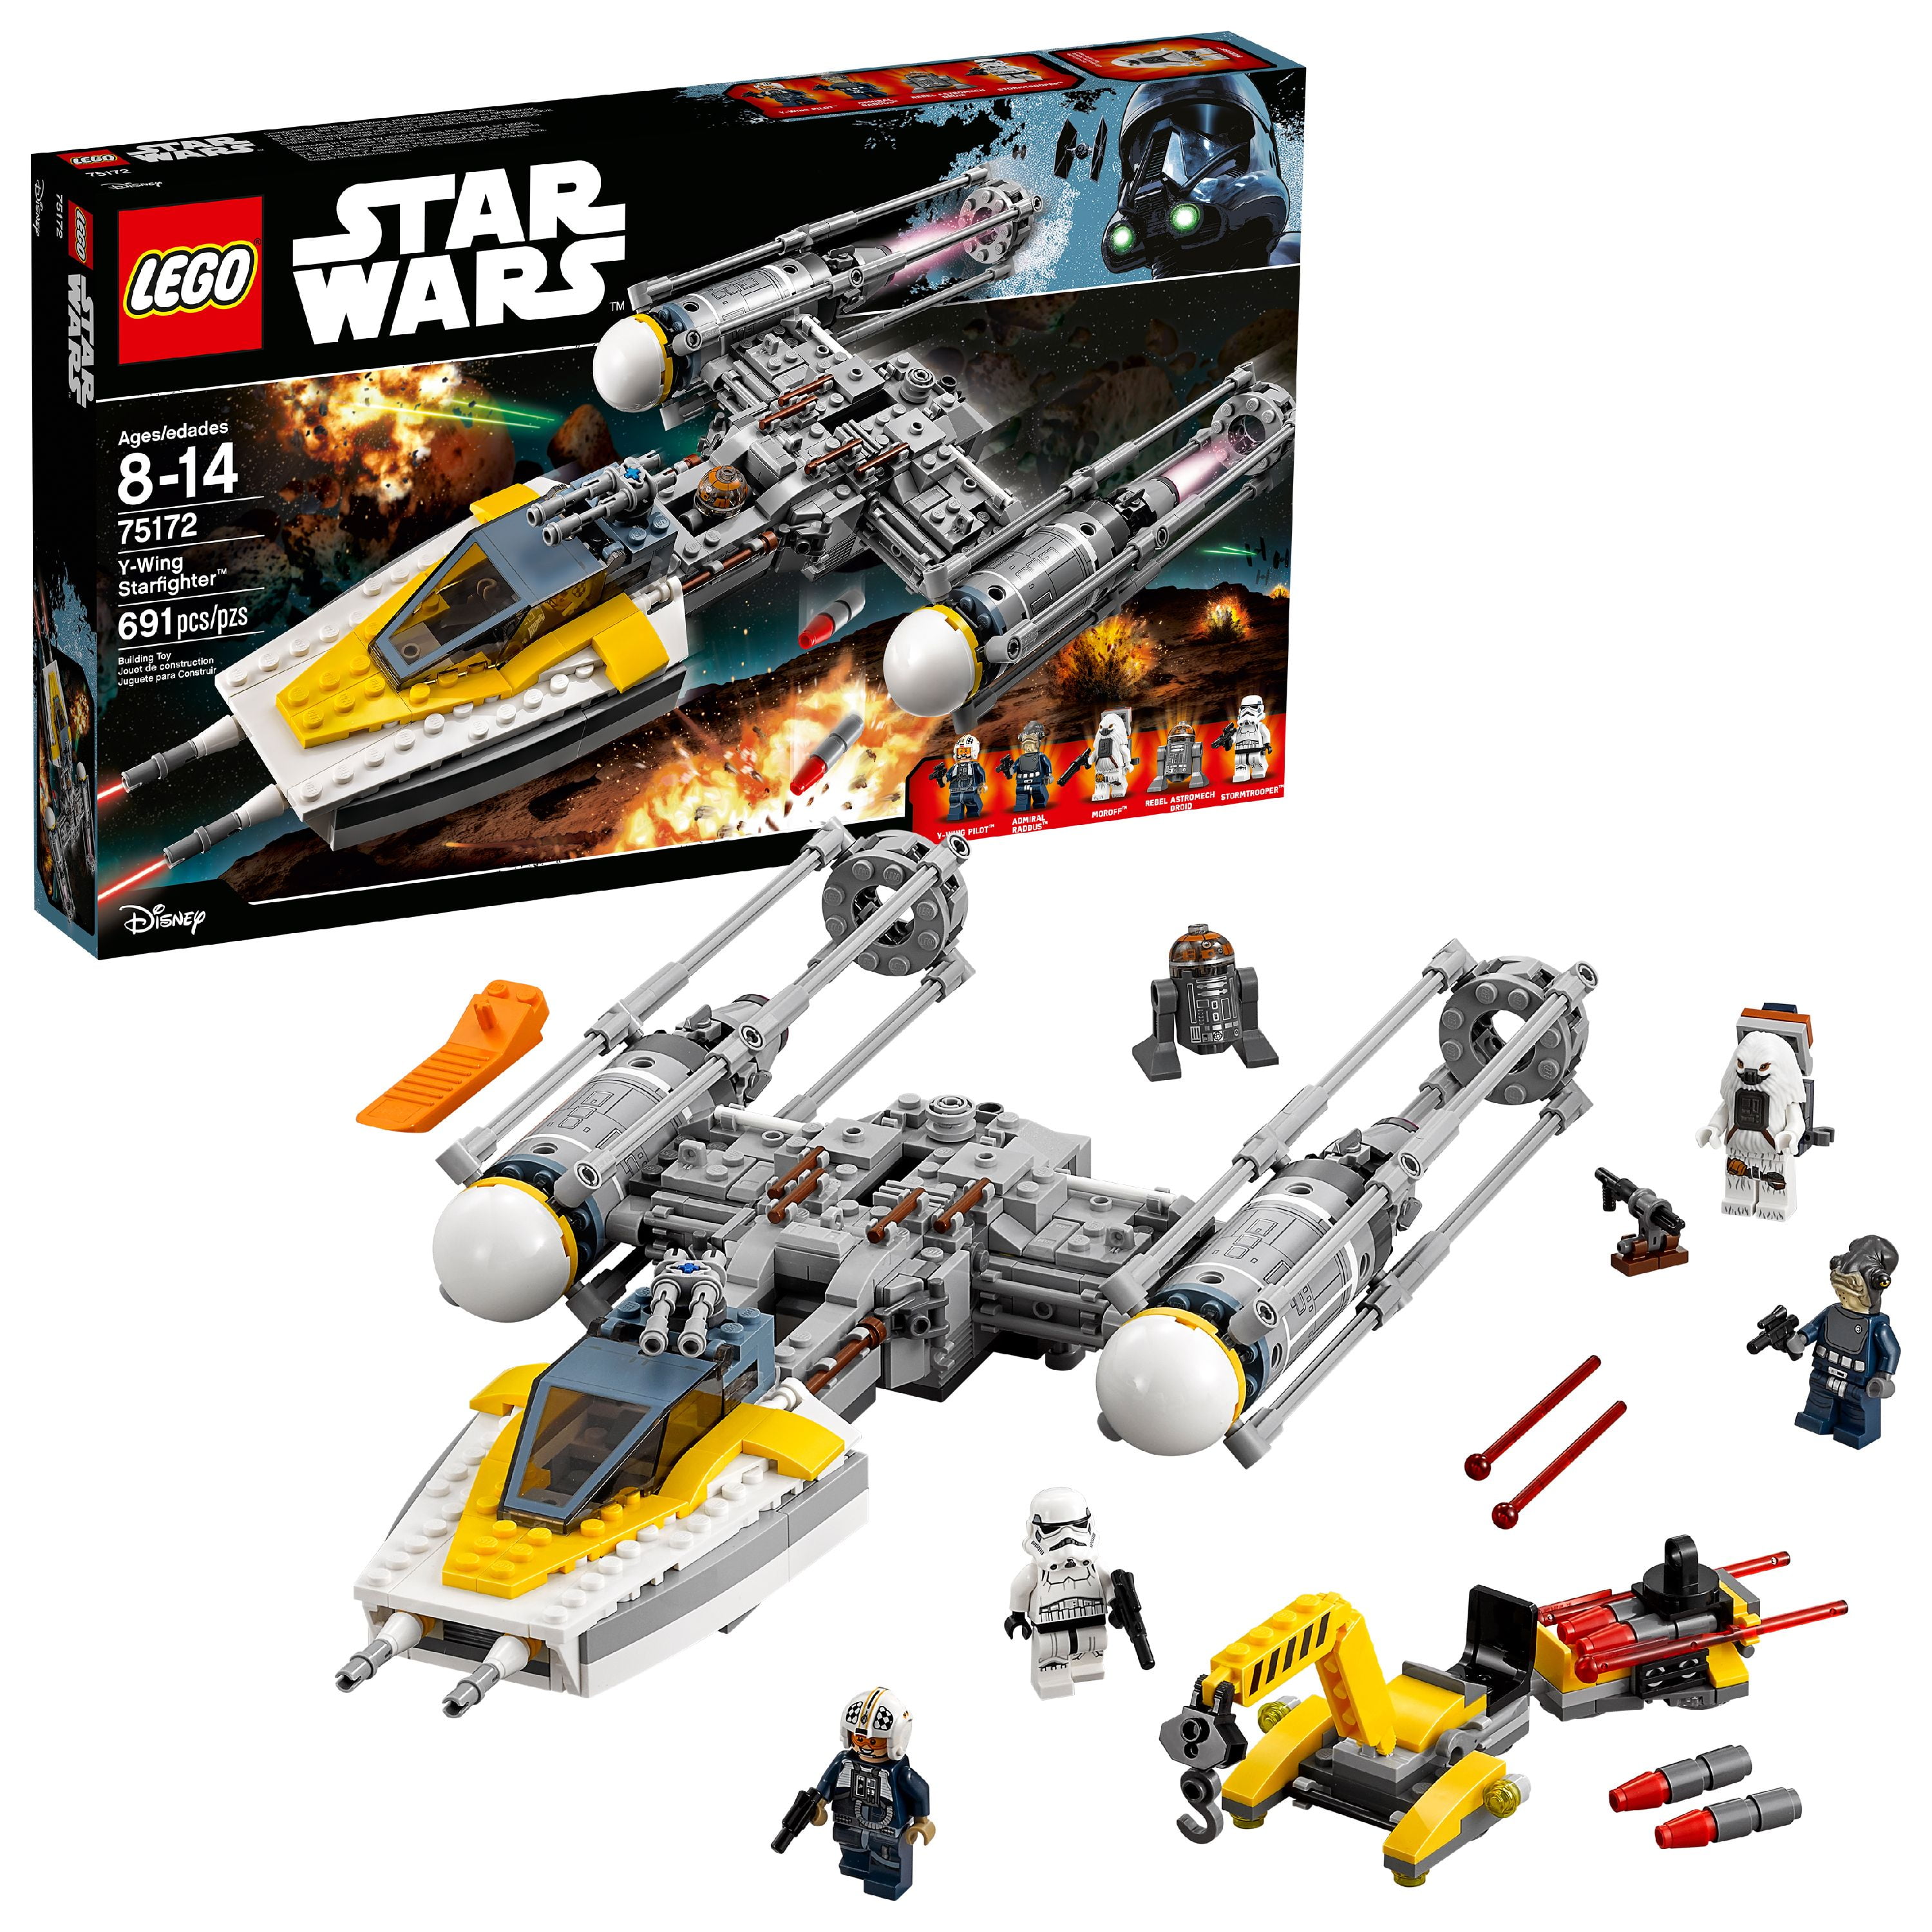 LEGO 75172 Star Wars Rogue One Y-wing Starfighting 691pcs for sale online